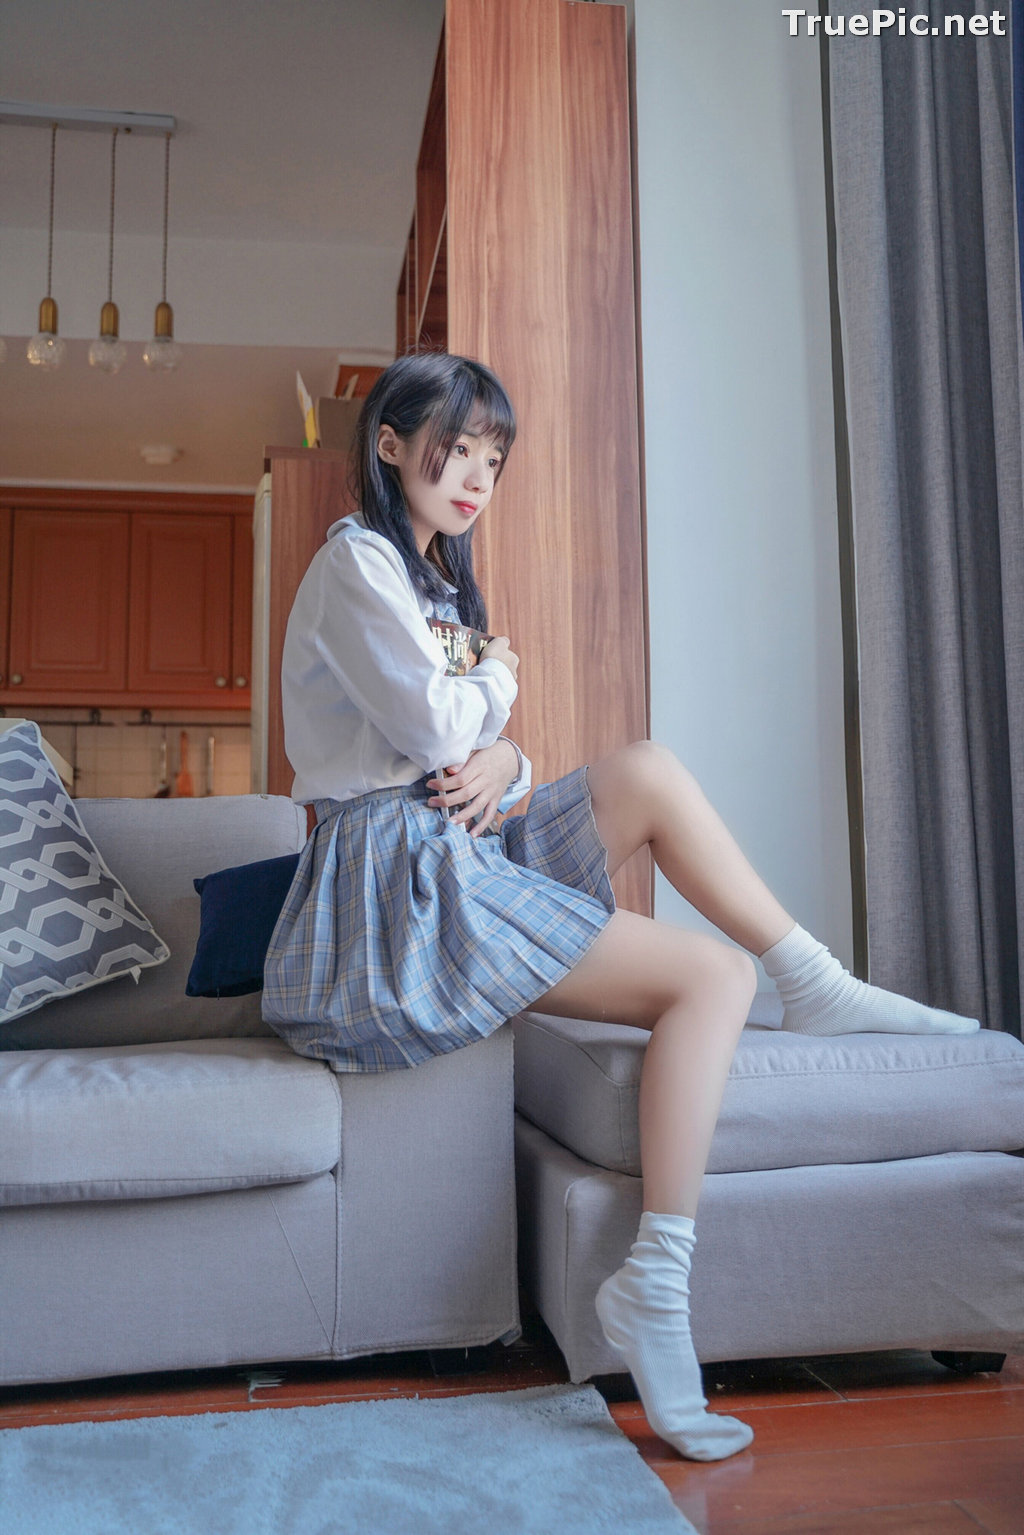 Image [MTCos] 喵糖映画 Vol.047 – Chinese Cute Model – Sexy Student Uniform - TruePic.net - Picture-34